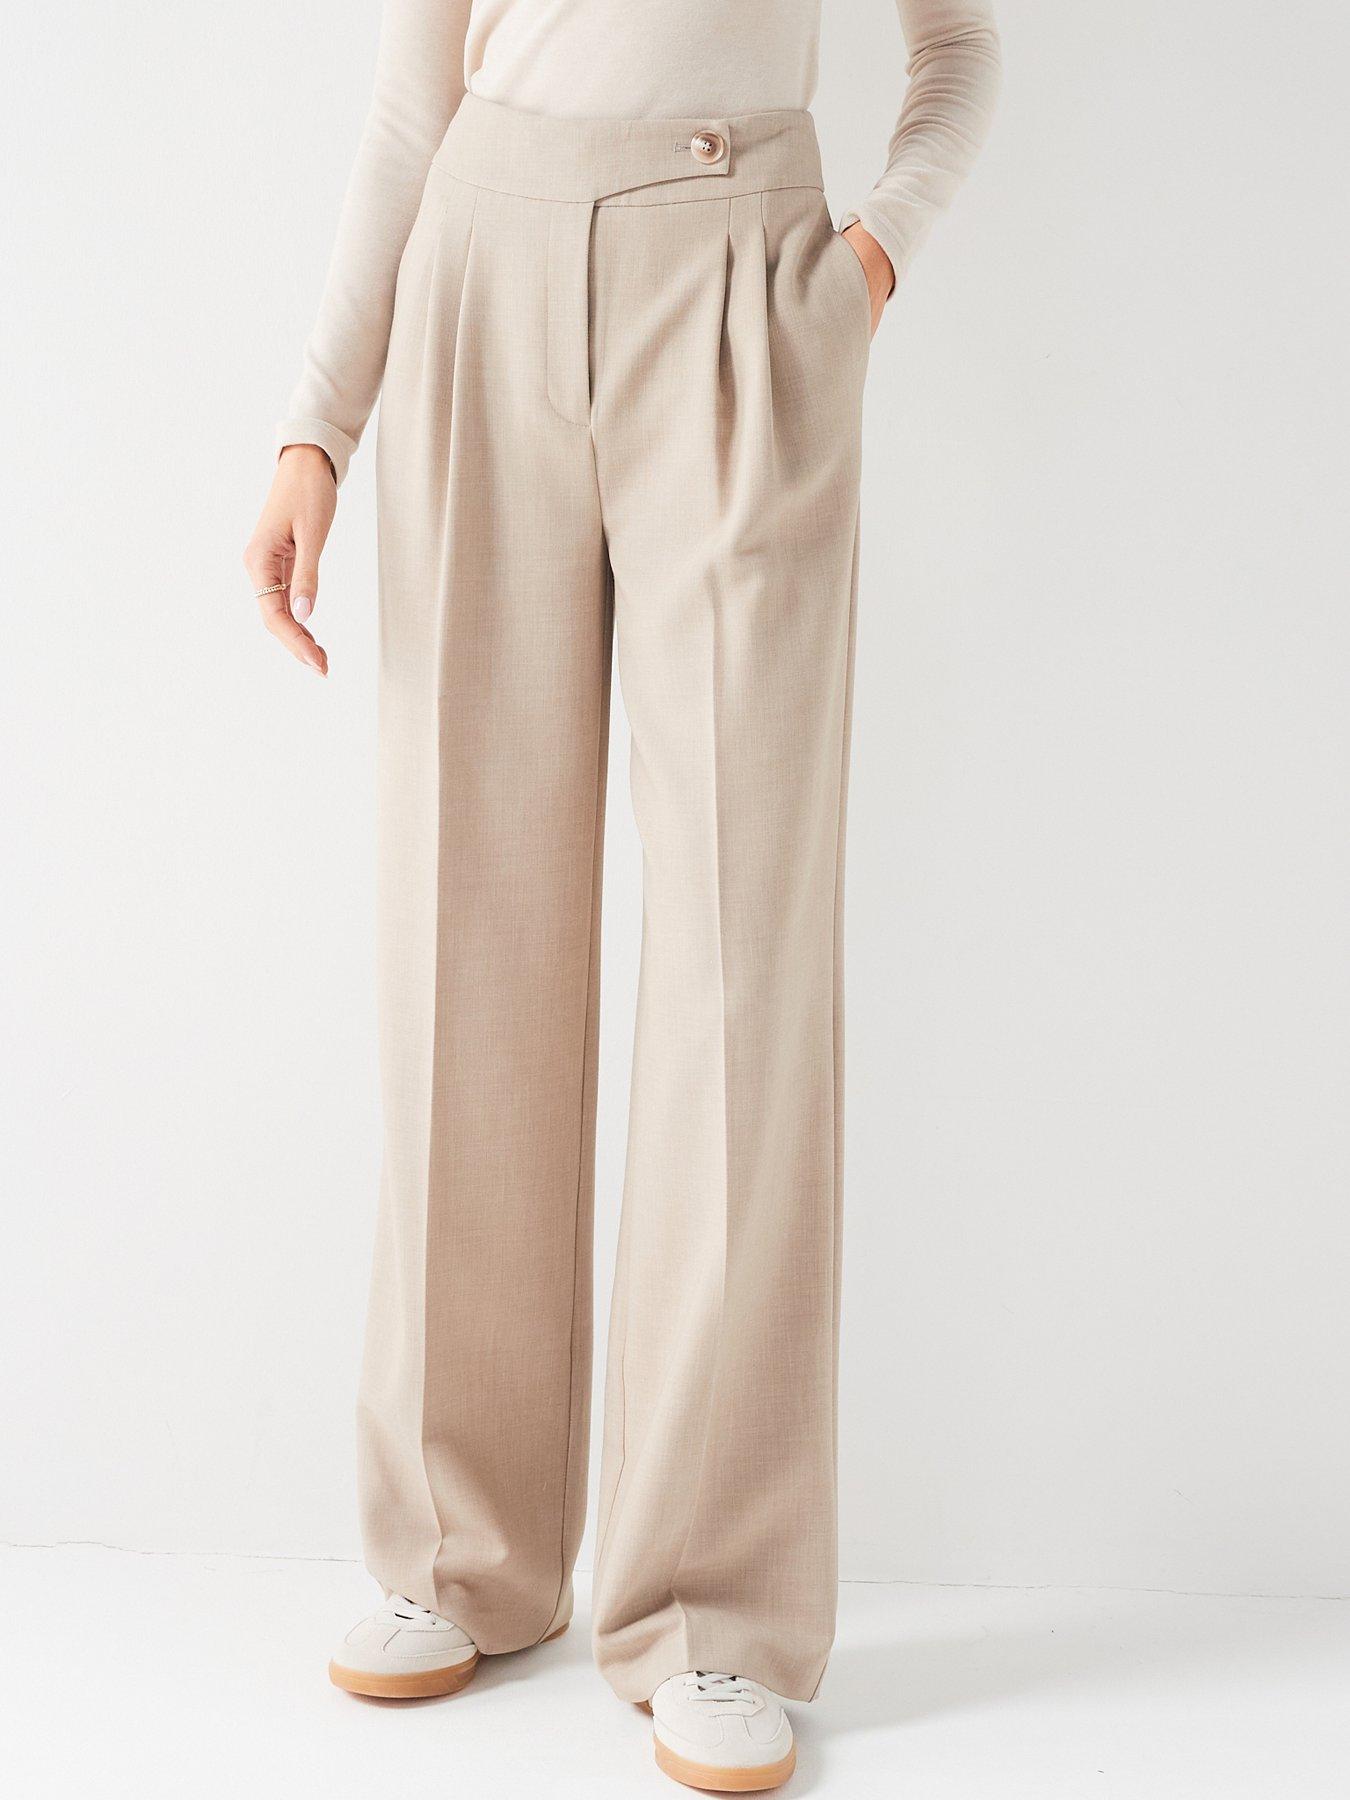 Bebe Going Out Women's Pants & Trousers - Macy's